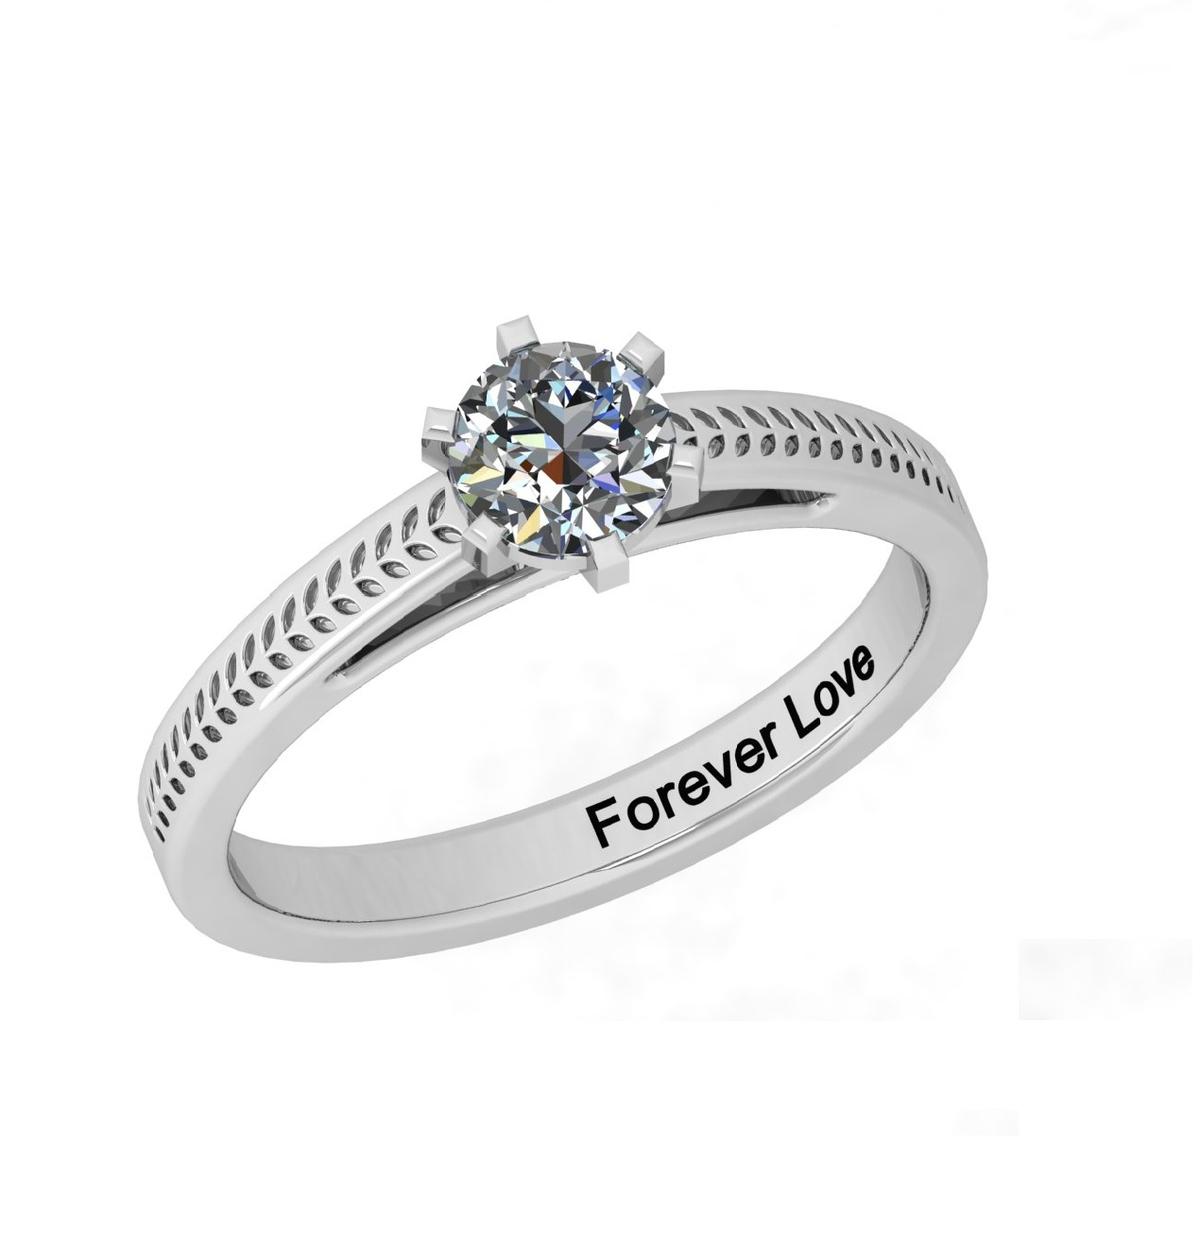 CERTIFIED 0.91 CTW G/SI2 ROUND (LAB GROWN Certified DIAMOND SOLITAIRE RING ) IN 14K YELLOW GOLD